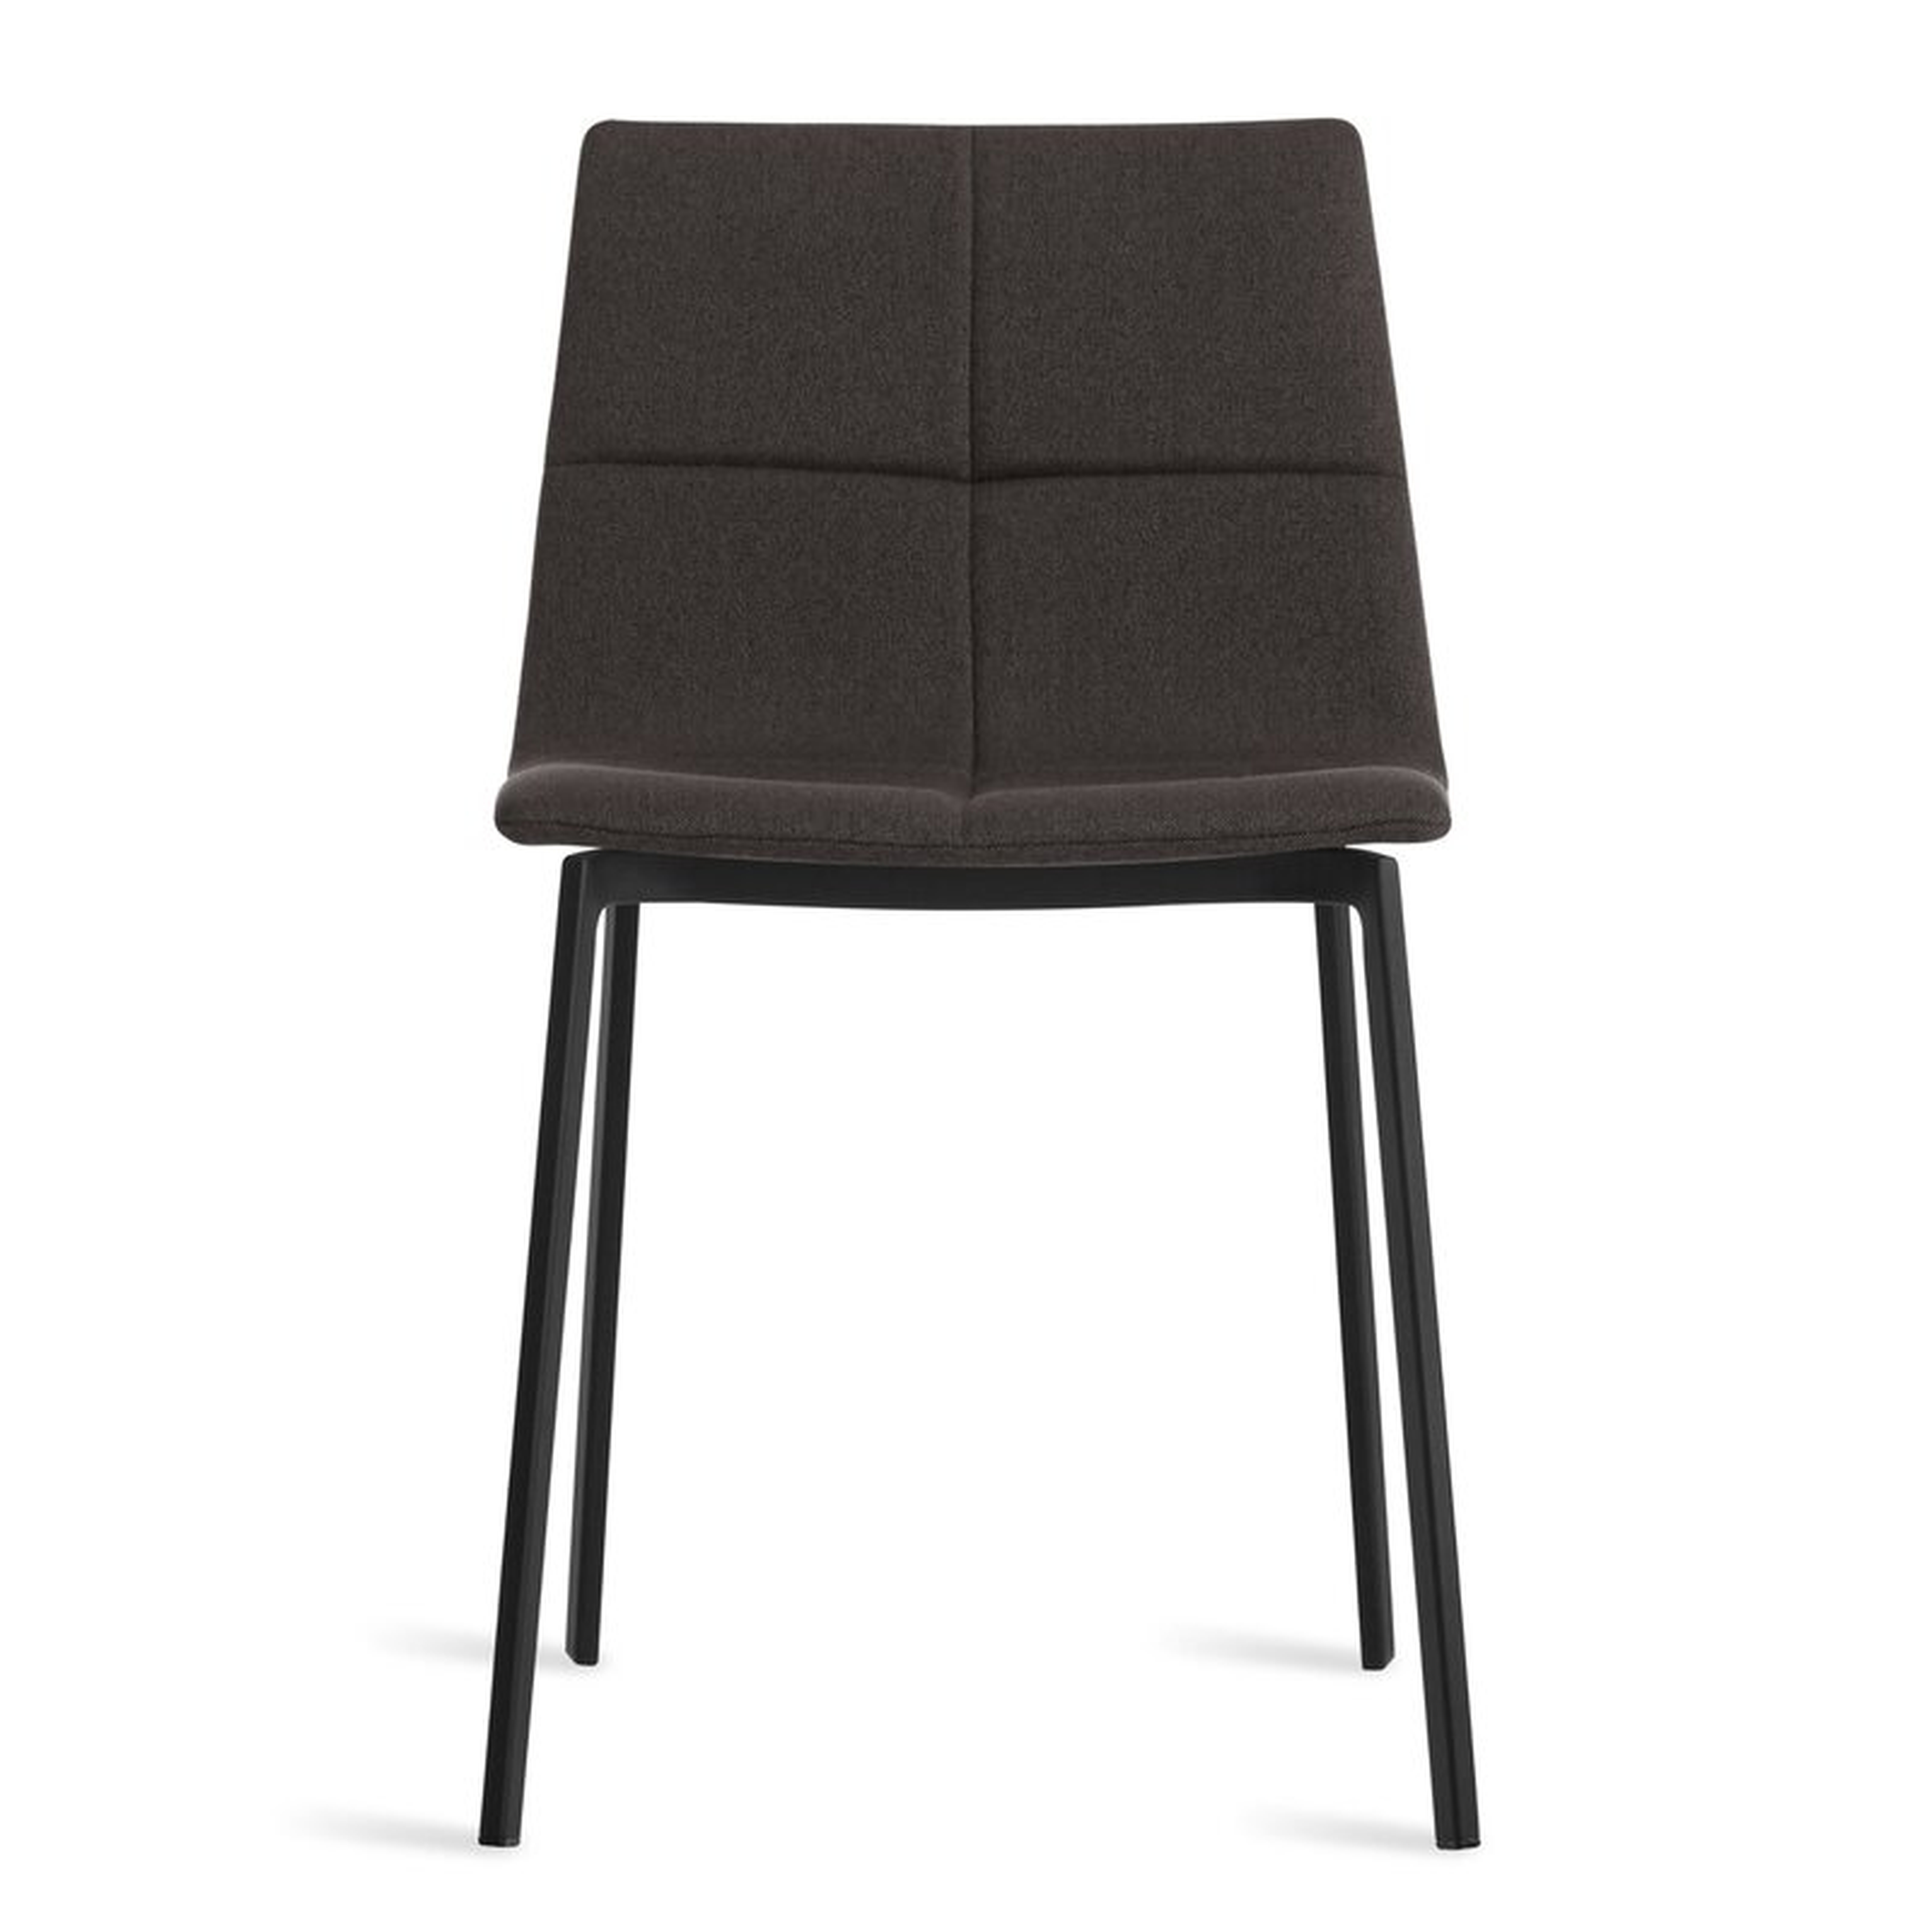 Blu Dot Between Us Dining Chair Upholstery Color: Gunmetal - Perigold